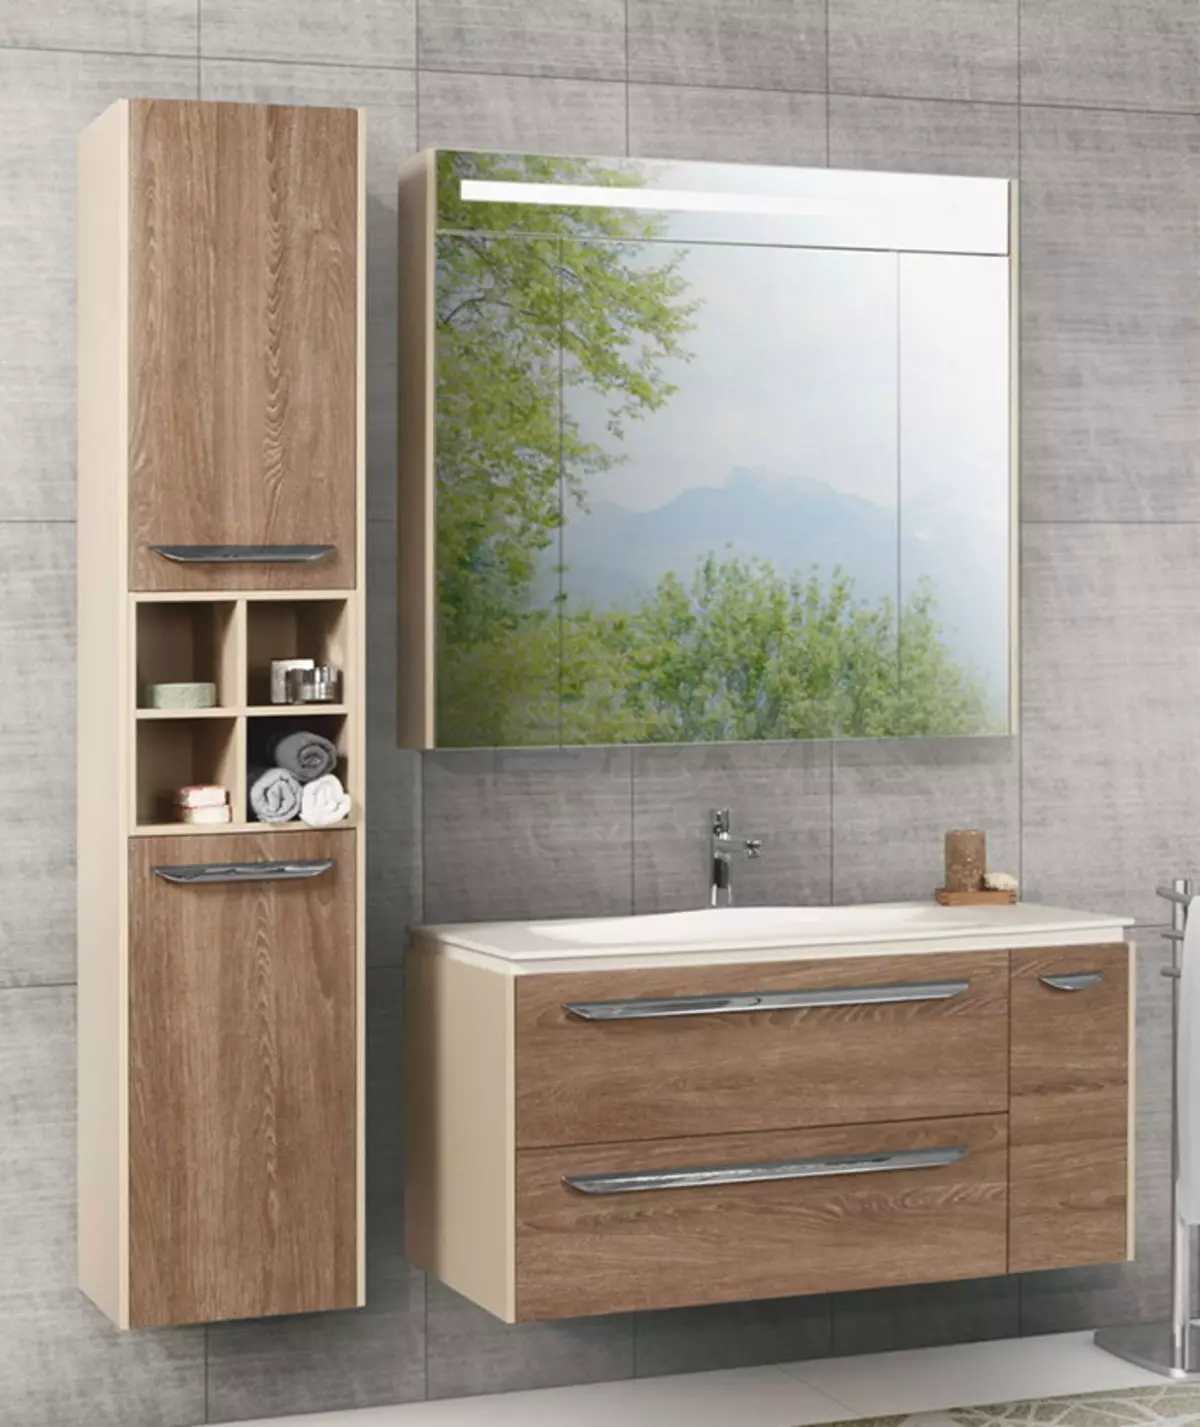 Bathroom Pencil: Overview of cabinets 25 cm wide and a depth of 20 cm, narrow models and with dimensions of 30 cm and 50 cm, 60 cm and 35 cm, outdoor, red and white 10387_78